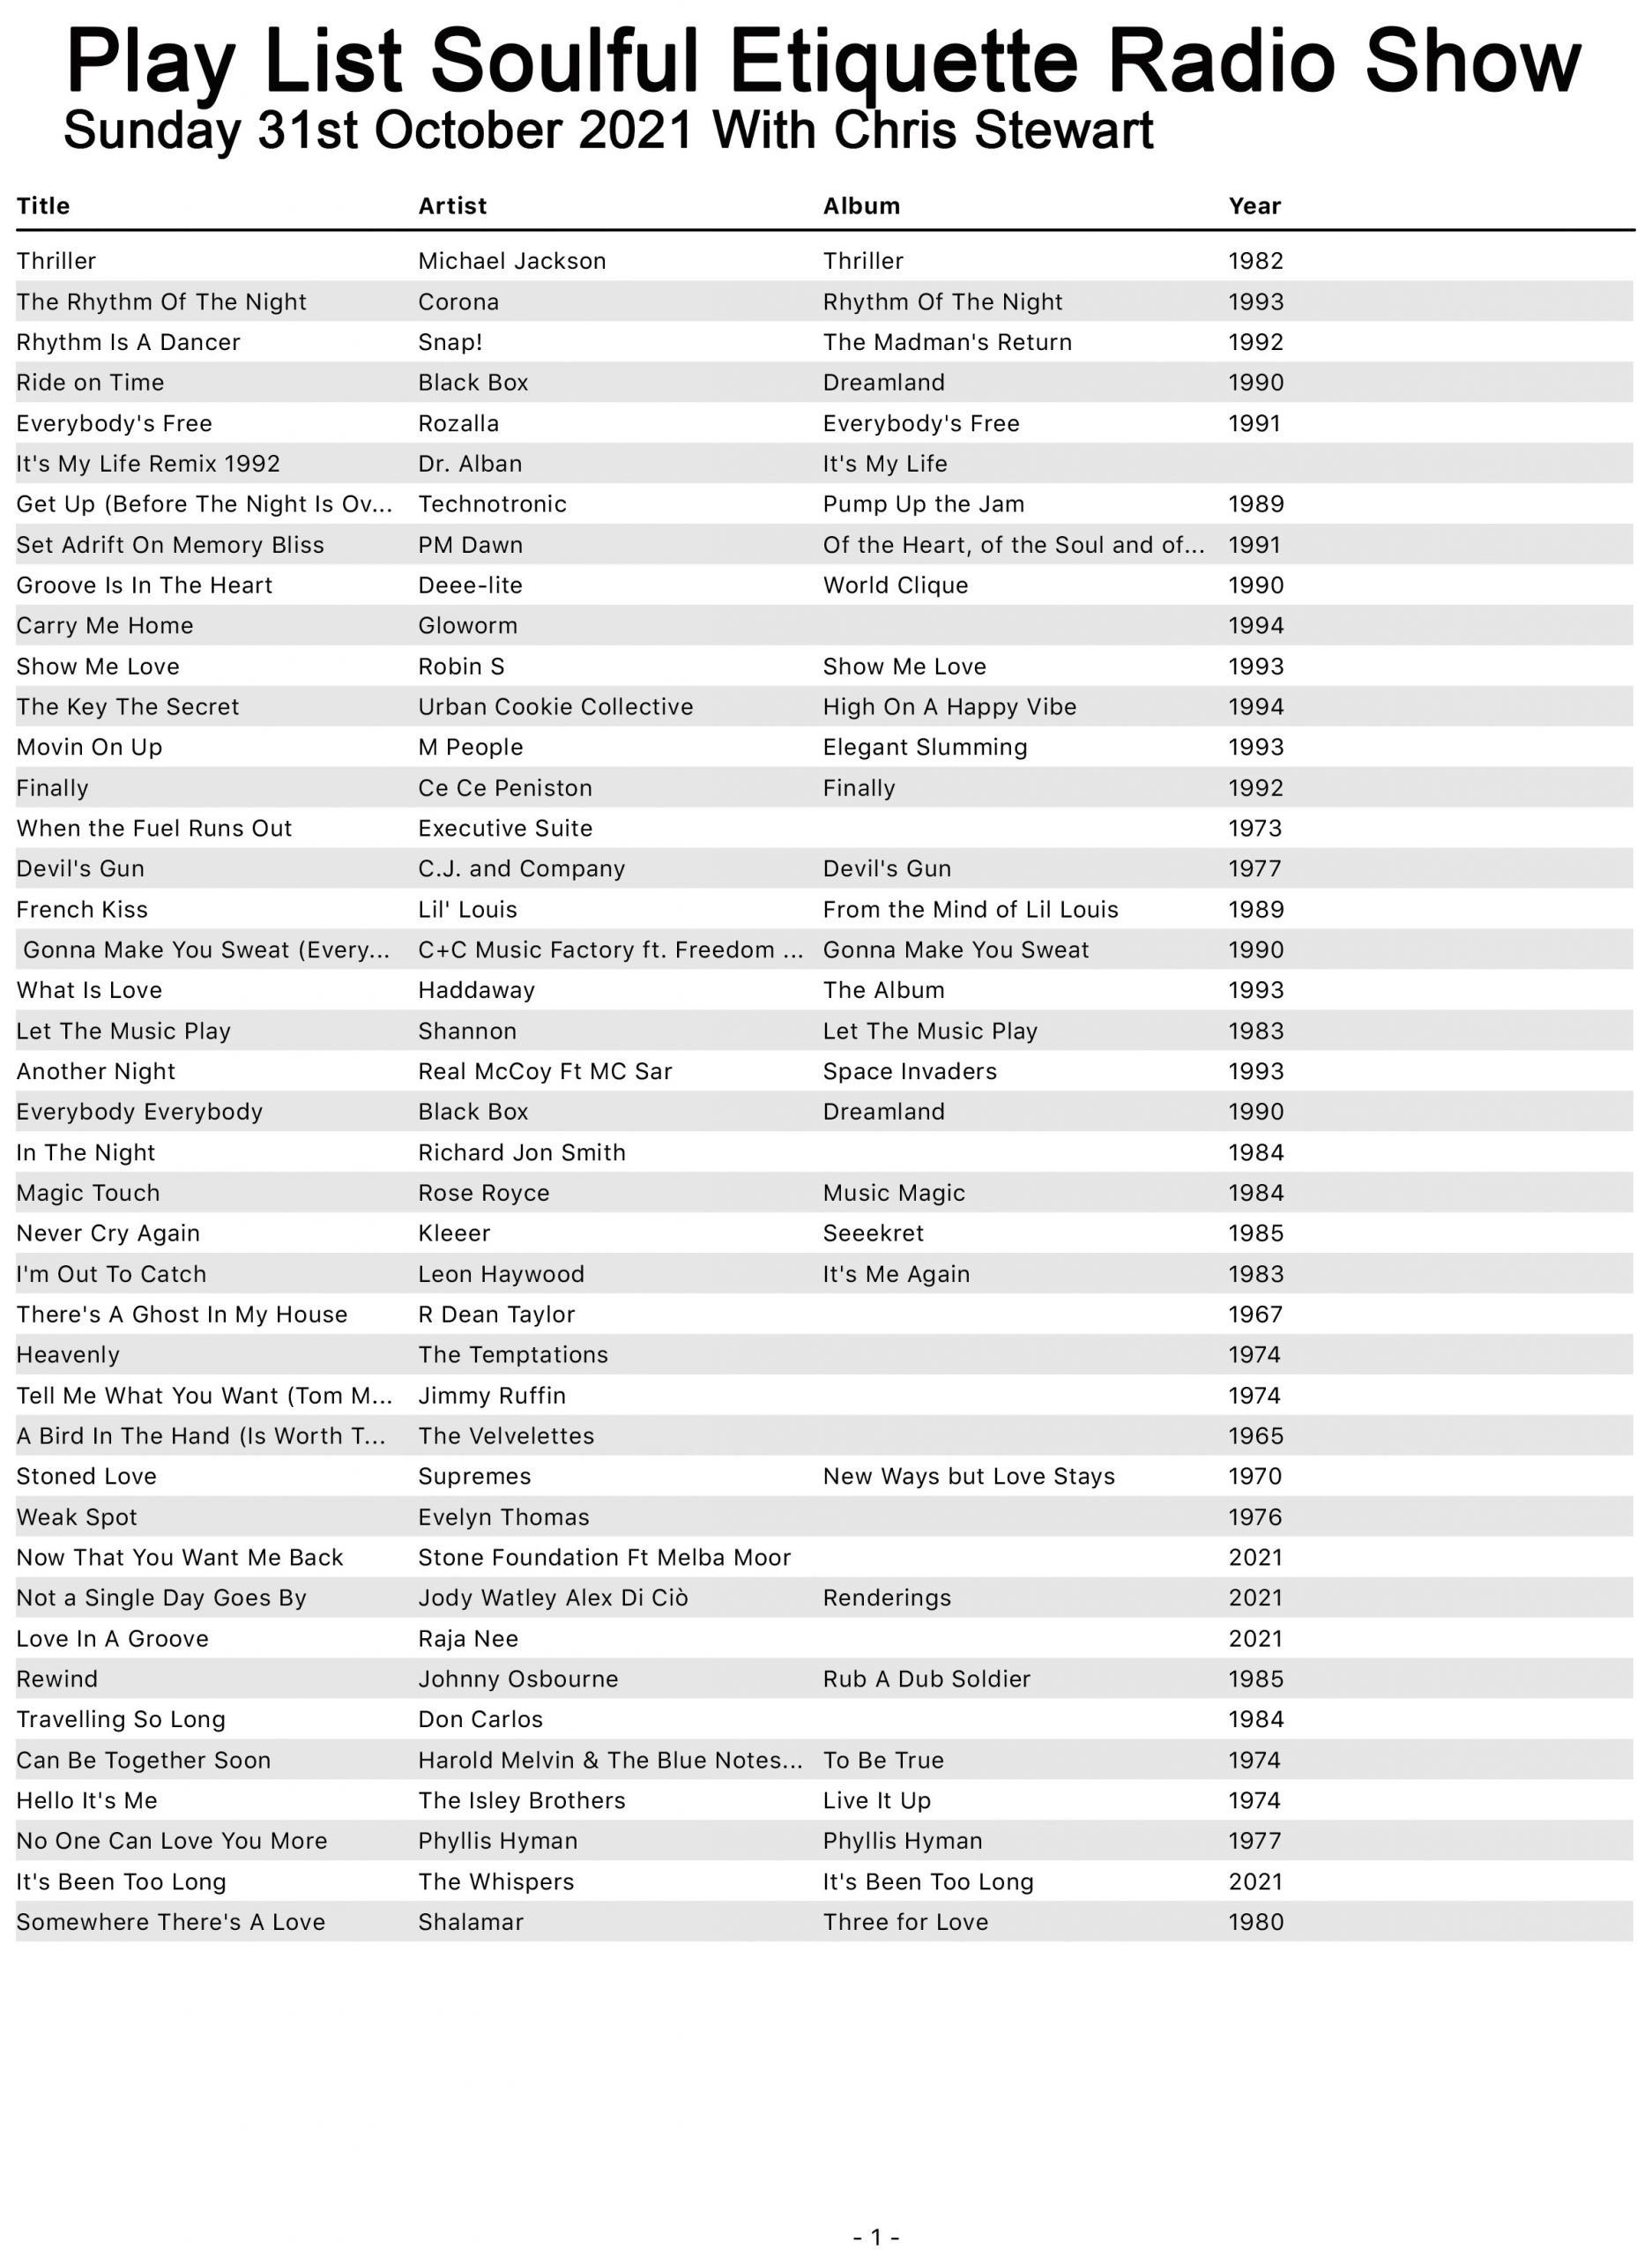 Play List for the Halloween special Soulful Etiquette Soul Radio Show Broadcast on 31st October 2021